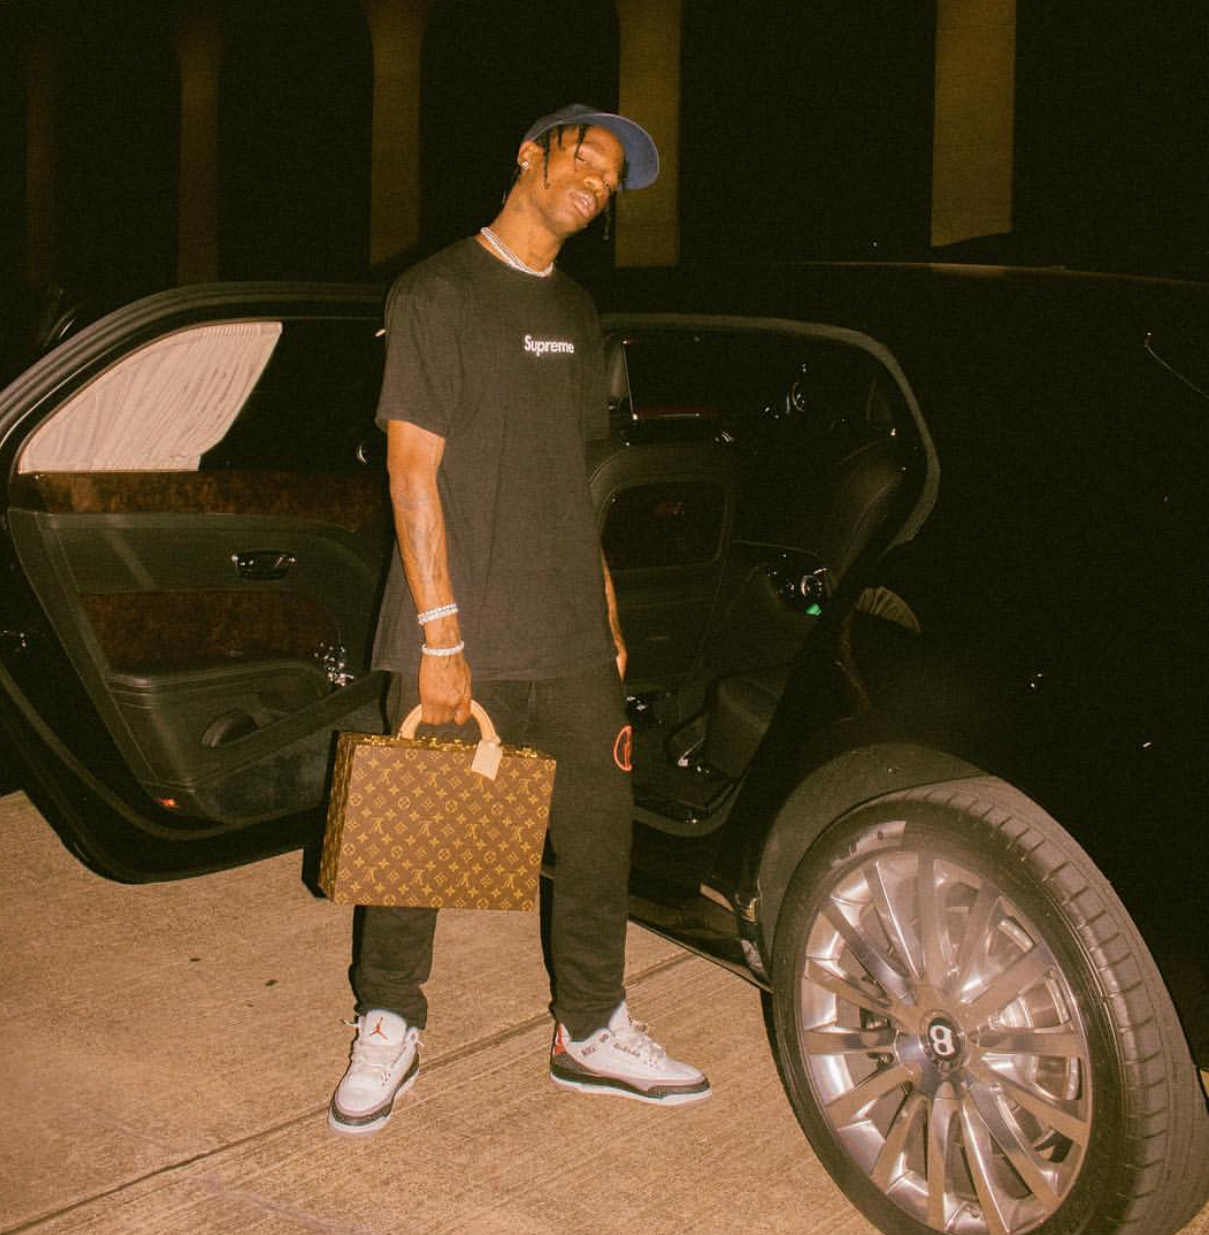 SPOTTED: Travis Scott Decked Out Head-To-Toe in Louis Vuitton